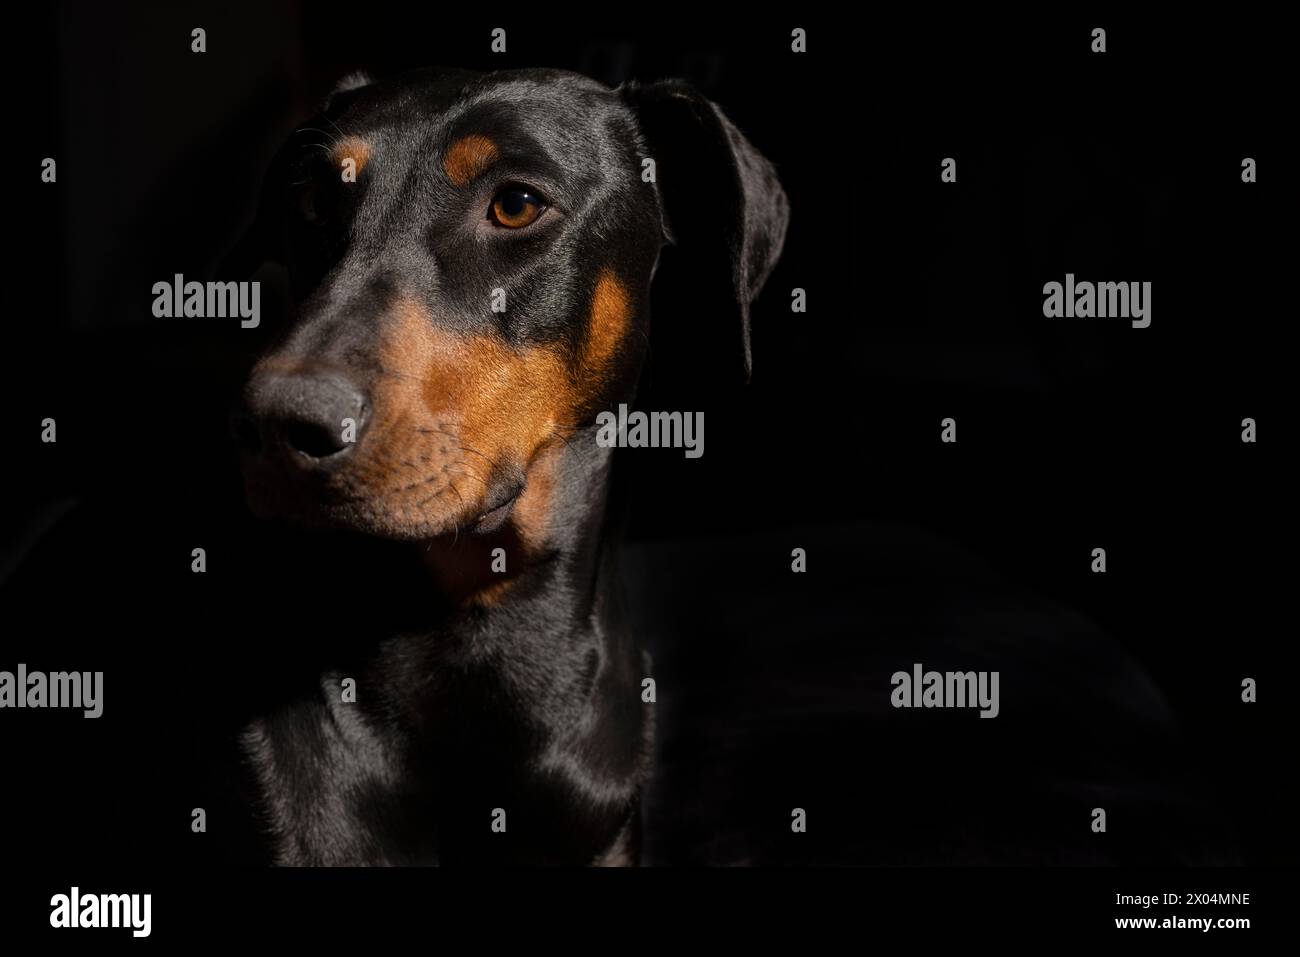 One year old black and red Doberman Pinscher portrait on a black background Stock Photo